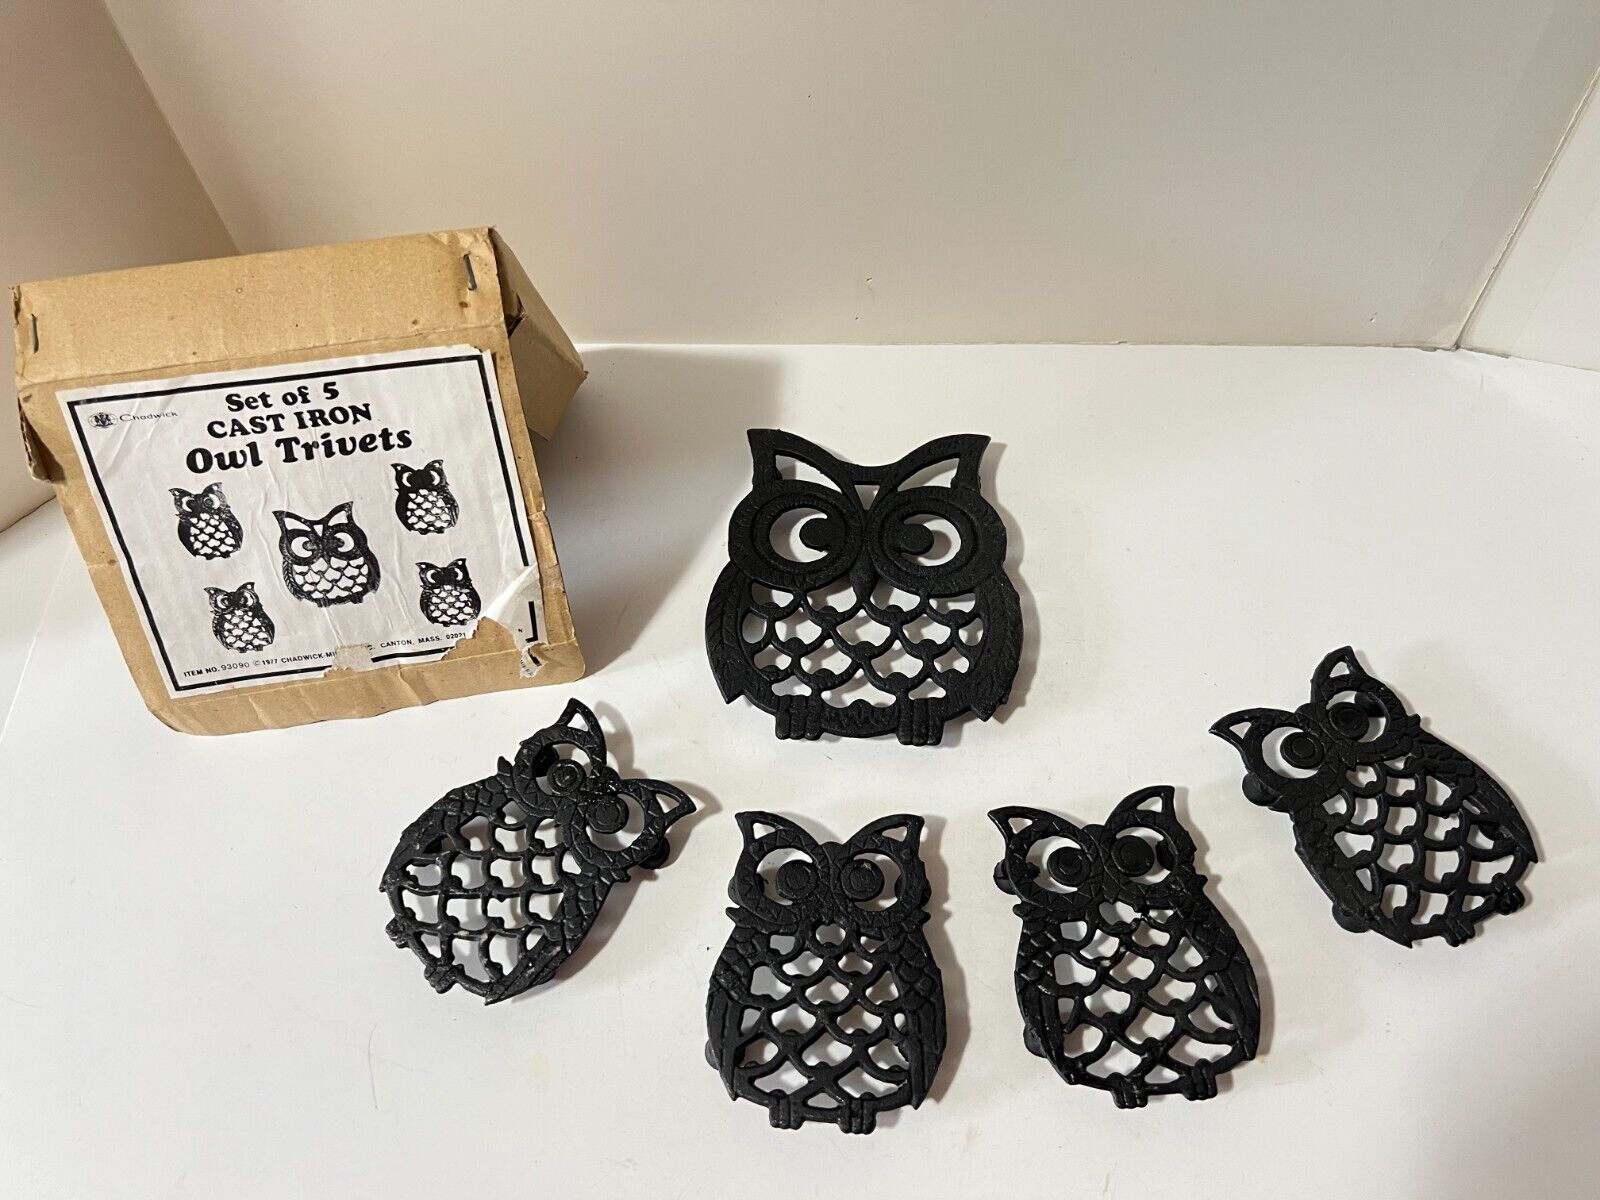 SET OF 5 VINTAGE 1977 CHADWICK CAST IRON OWL TRIVETS IN THE BOX